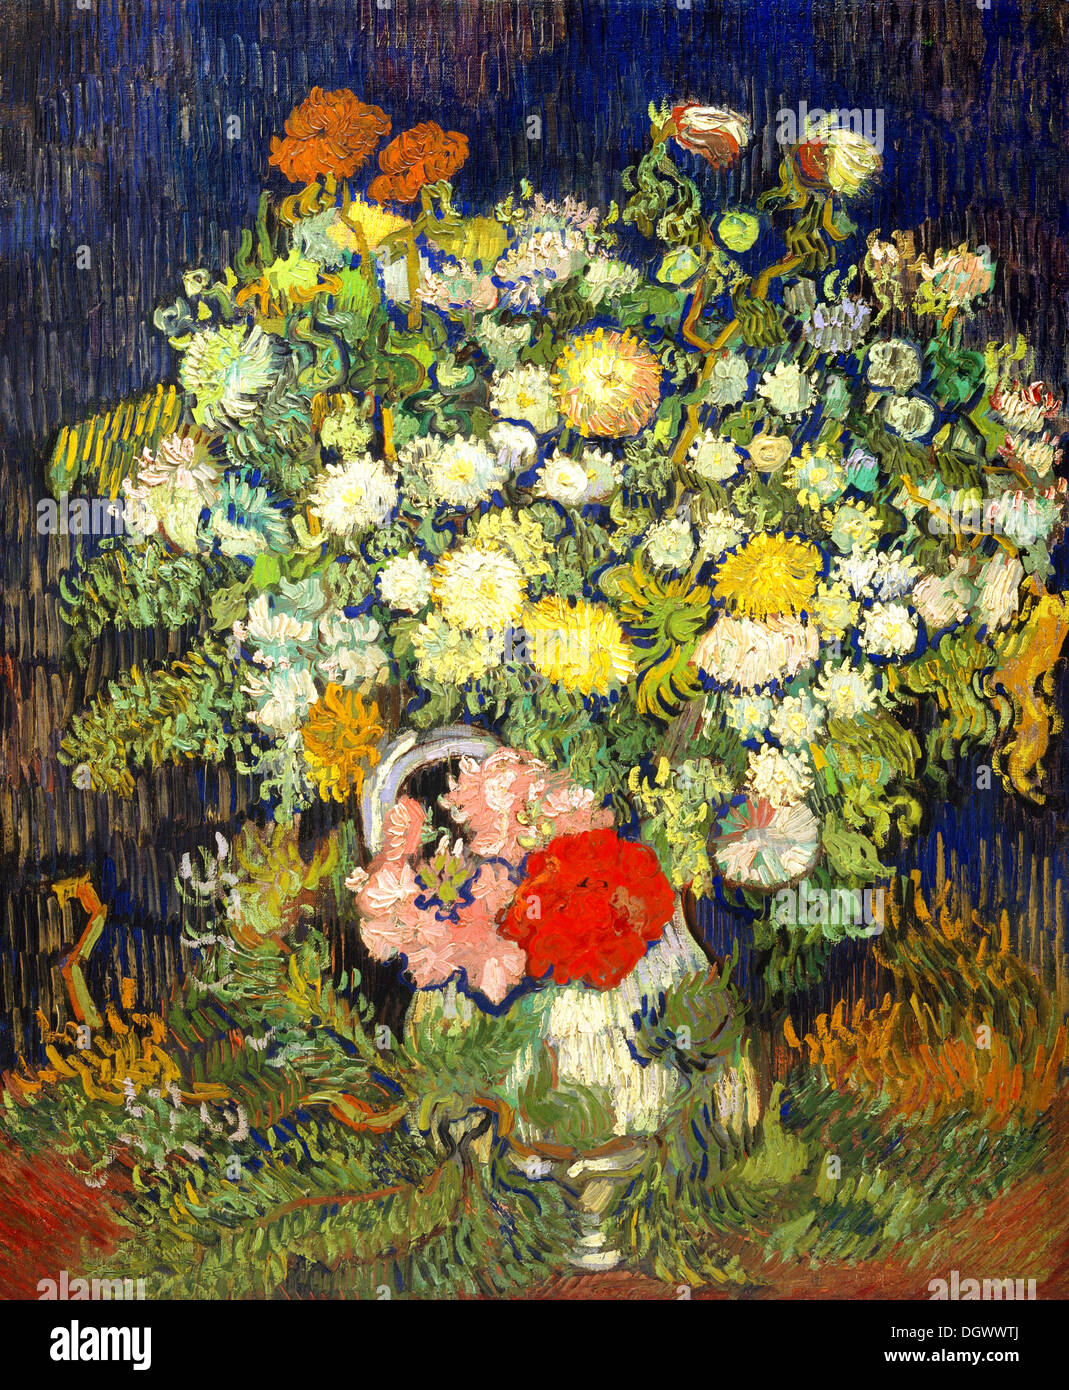 Mazzo Di Fiori Van Gogh.Bouquet Of Flowers In A Vase By Vincent Van Gogh 1890 Stock Photo